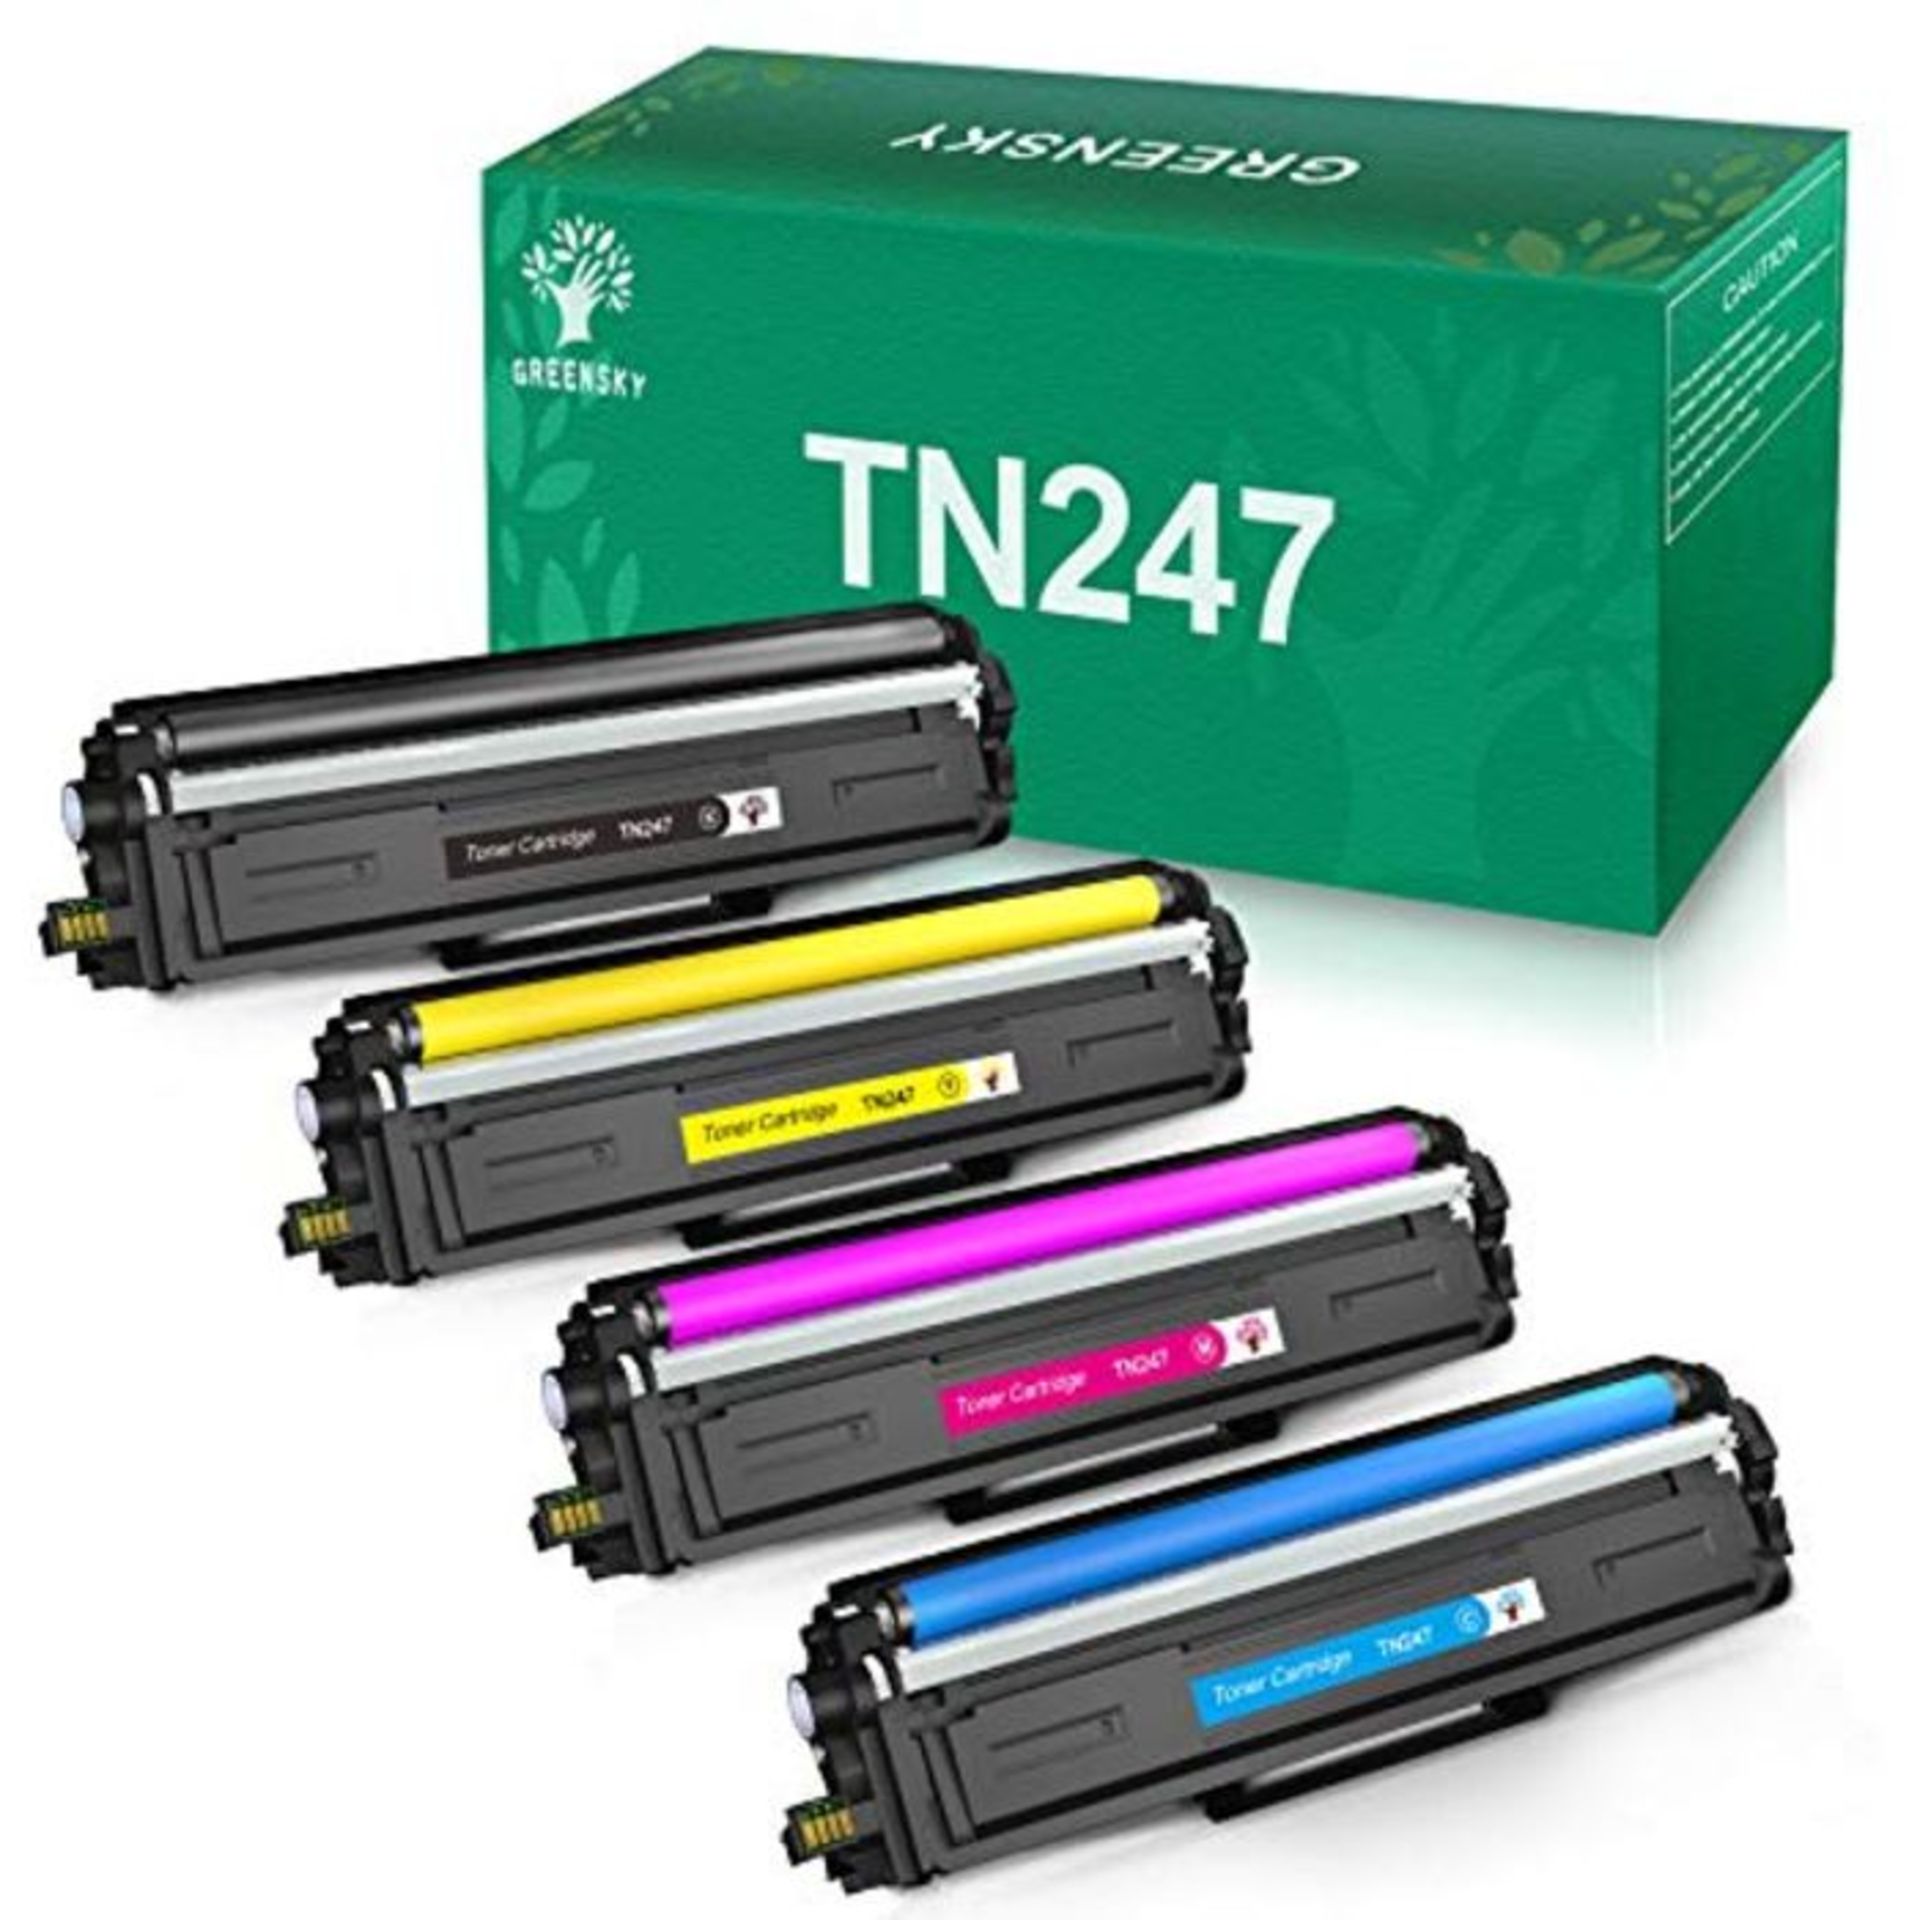 GREENSKY Compatible Toner Cartridge Replacement for Brother TN247 TN243 for HL-L3210CW